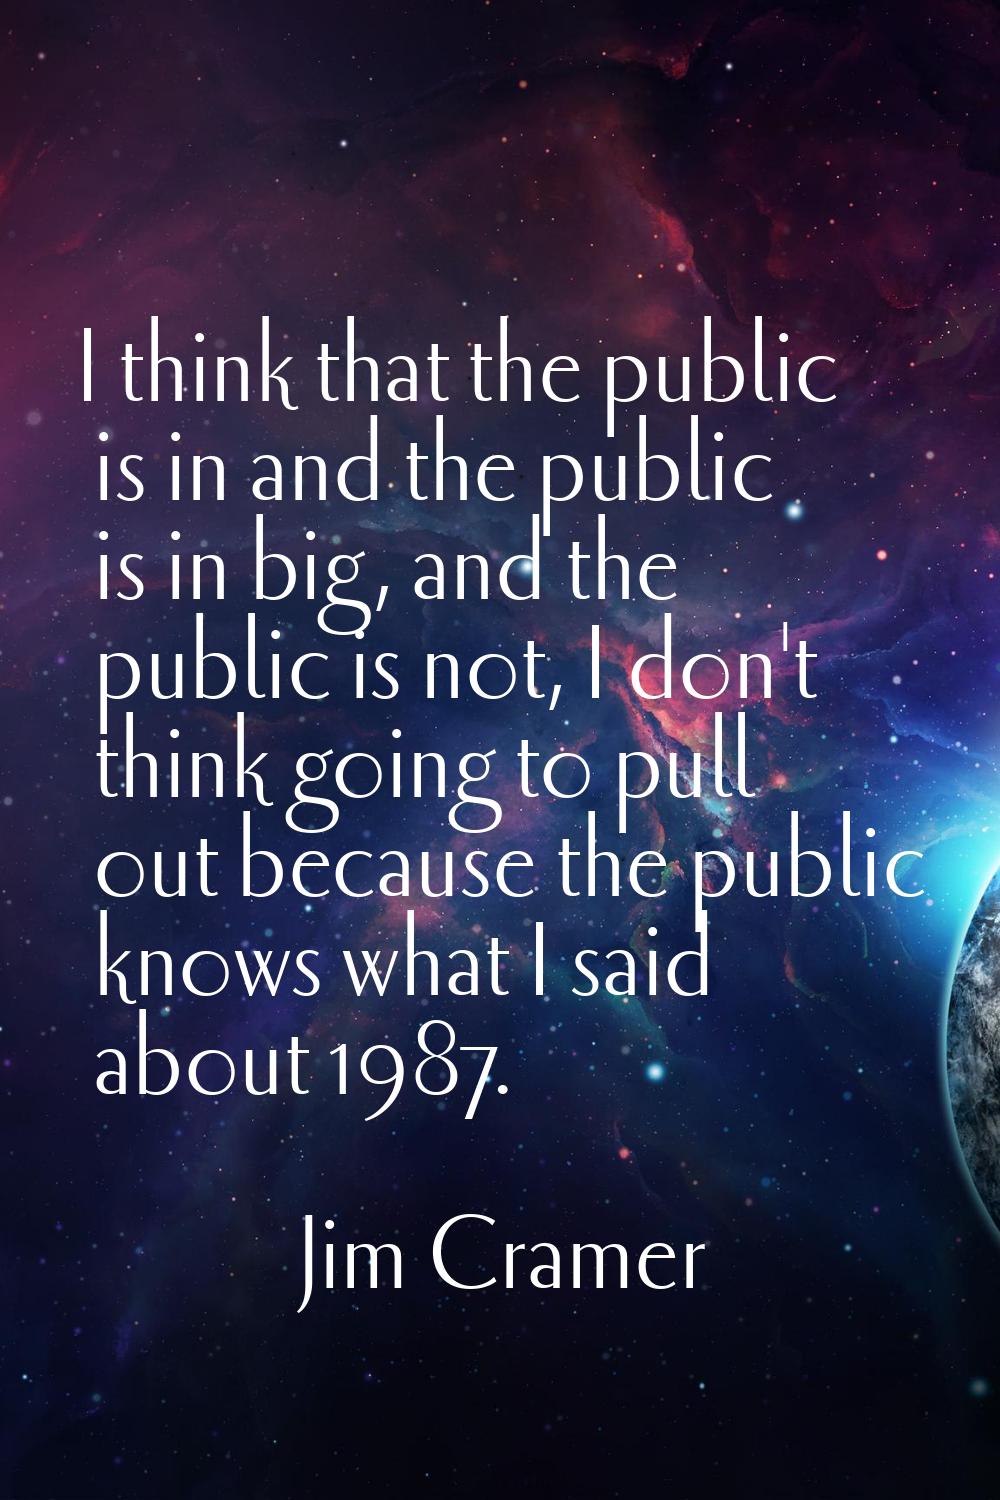 I think that the public is in and the public is in big, and the public is not, I don't think going 